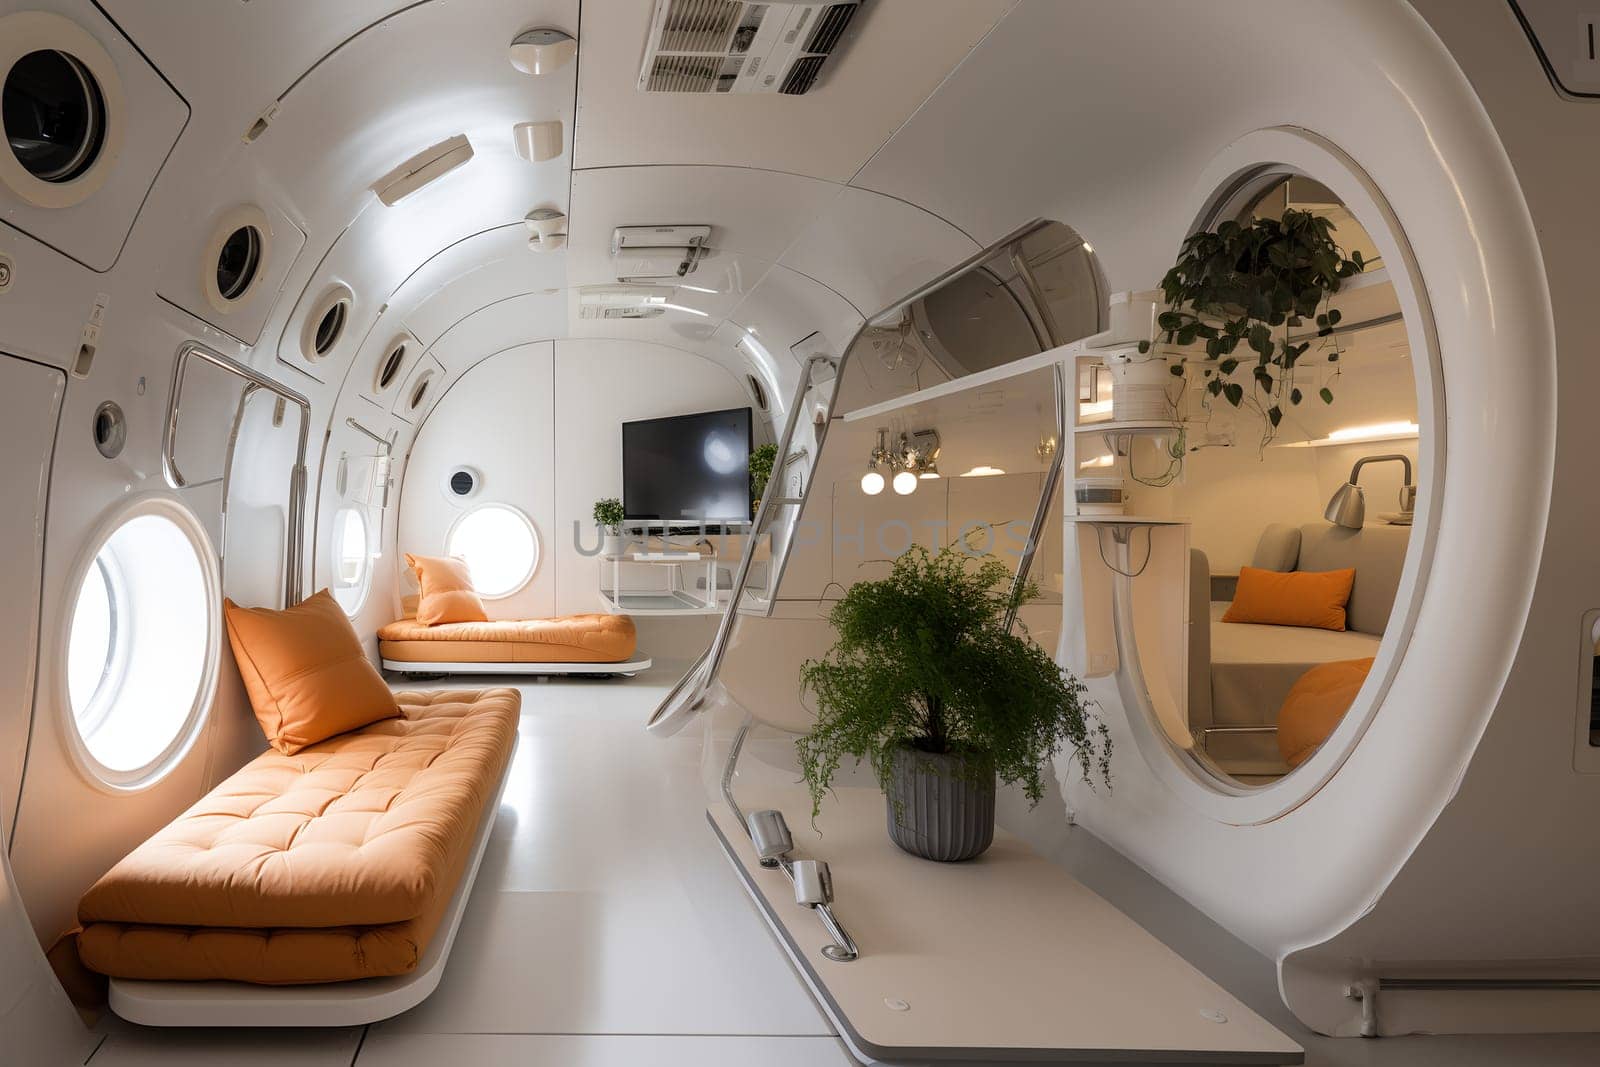 Futuristic Capsule Hotel Interior With Sleek Design and Comfort Amenities by chrisroll